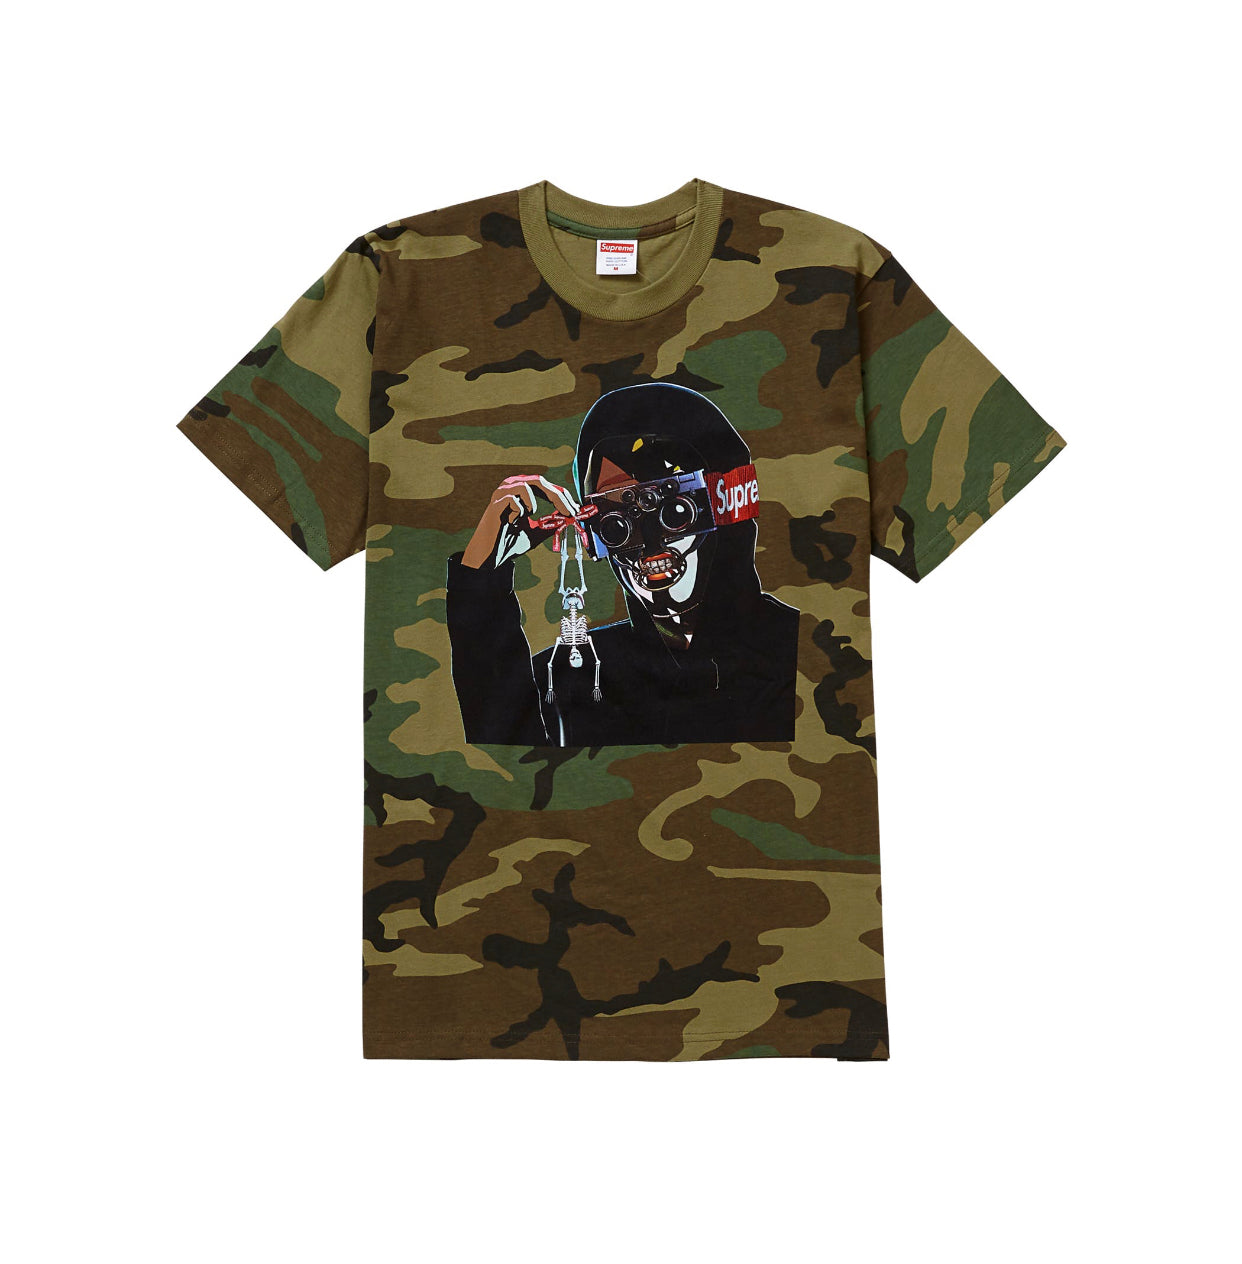 SS19 Supreme collection.  Supreme Creeper Tee in the Woodland Camo. For sale at www.believeshops.com